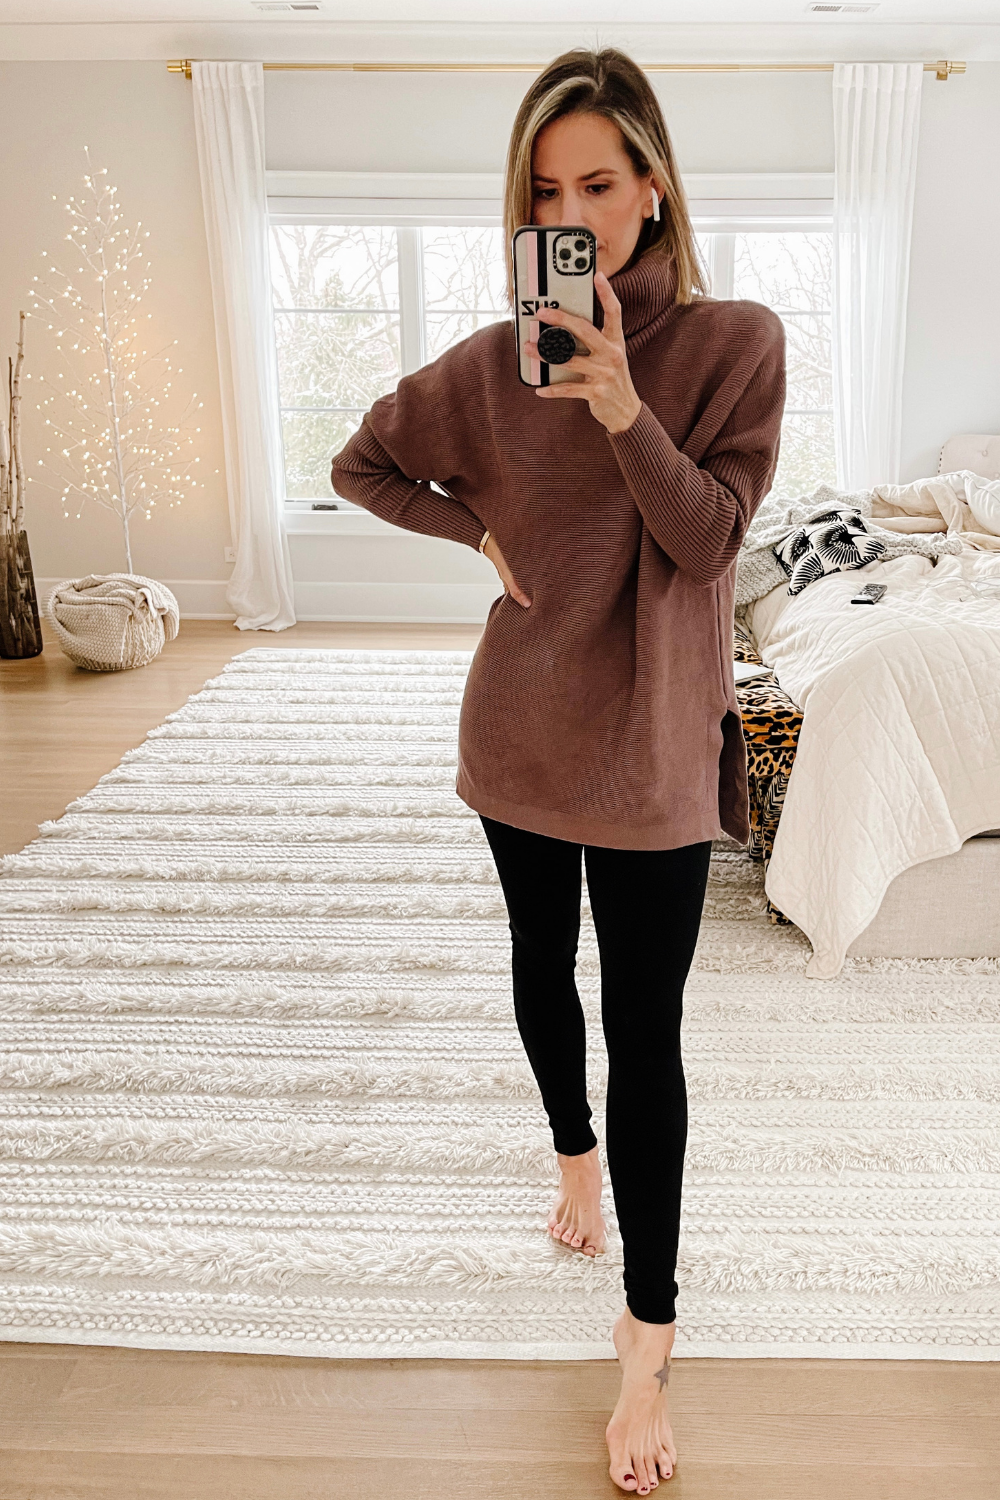 Suzanne wearing an oversized sweater and leggings from Amazon